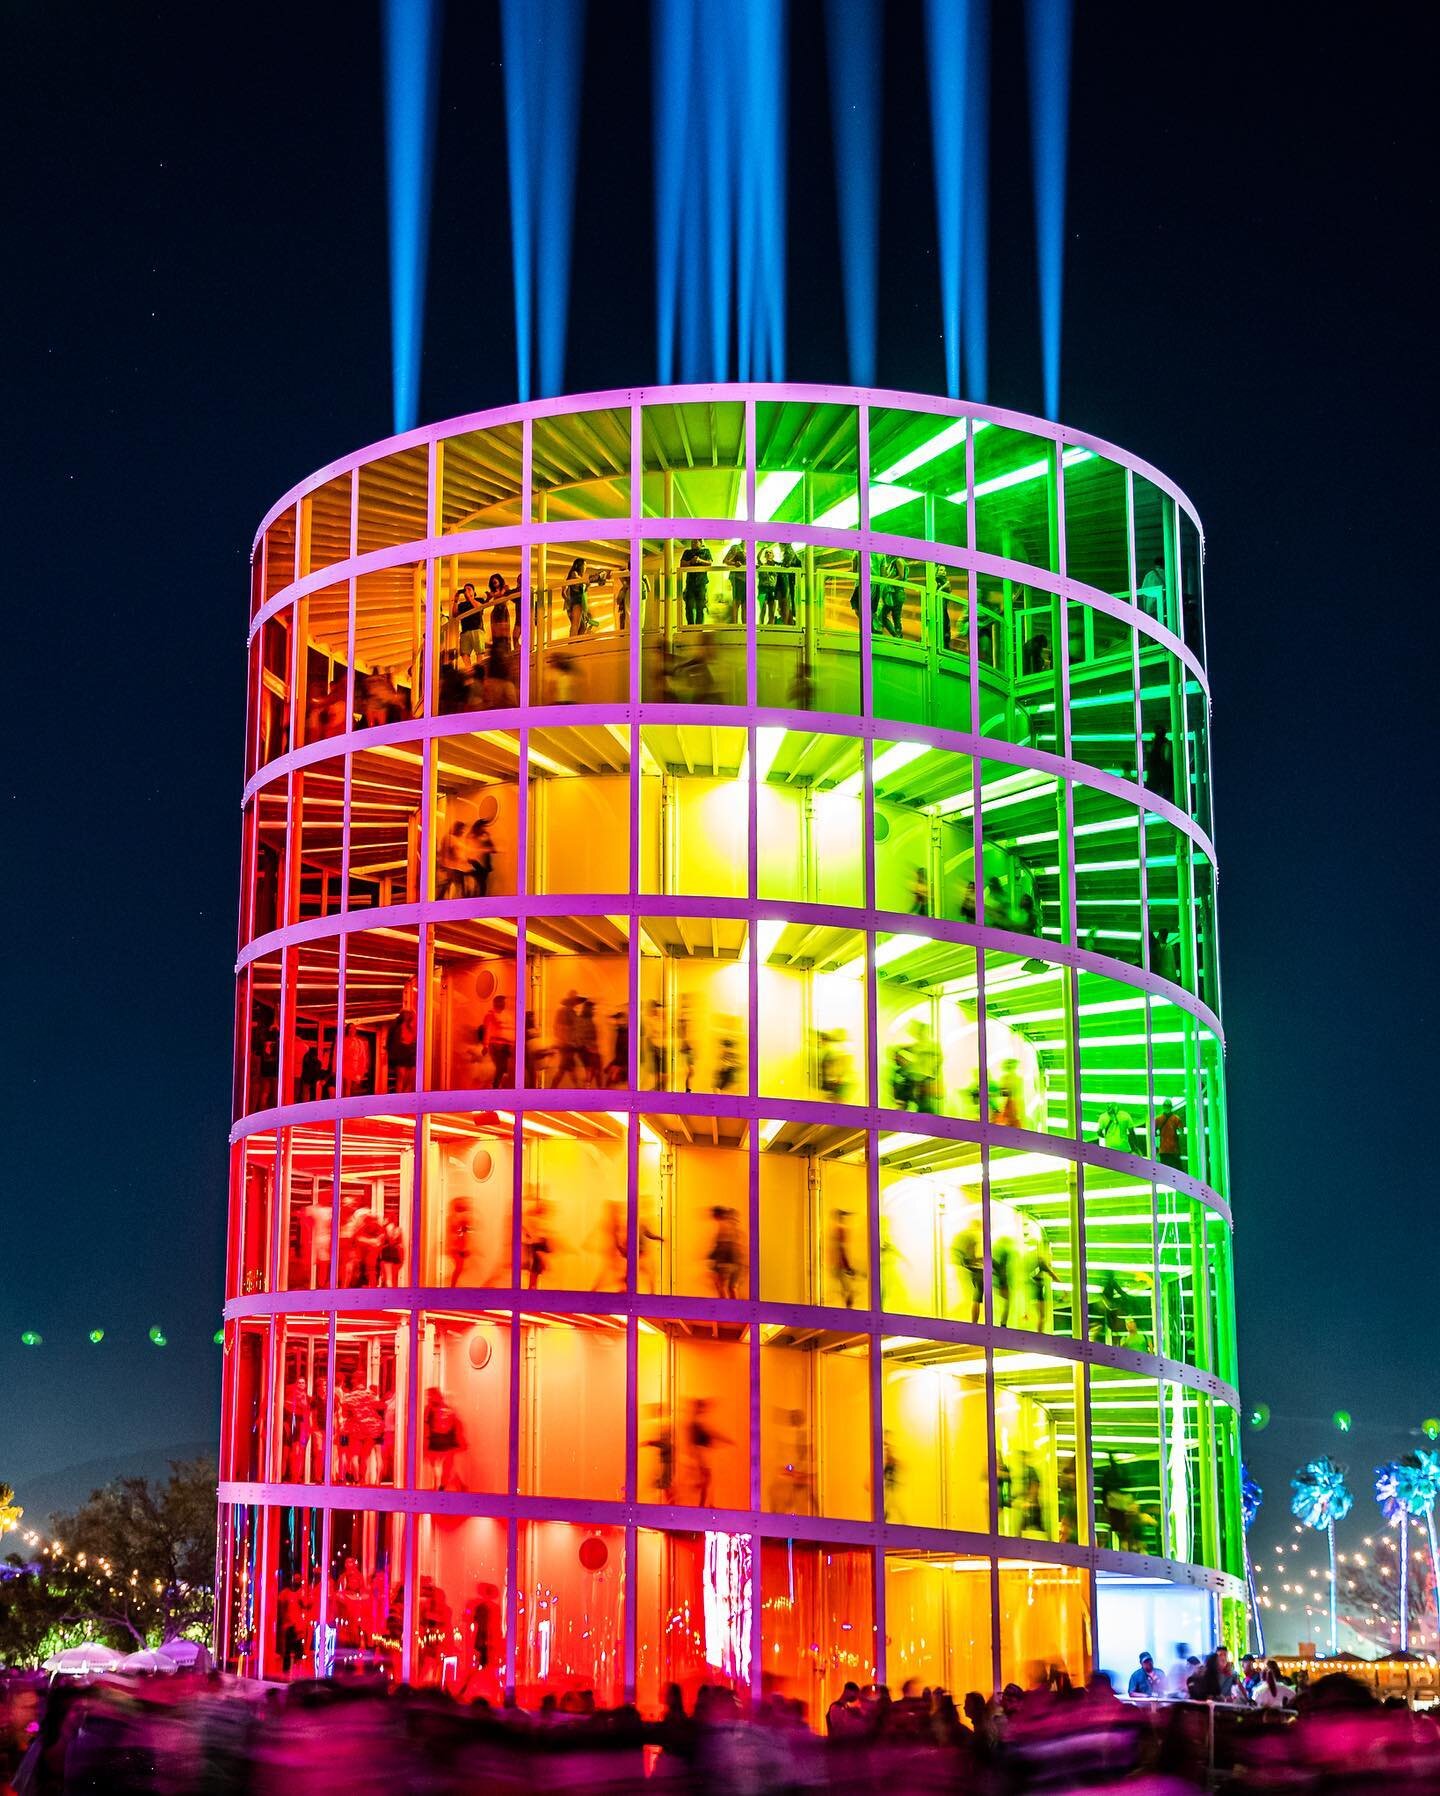 Big thank you to @coachella for including my photo from 2019 of the iconic SPECTRA tower in a first-of-its-kind NFT drop tomorrow. Honored to be represented in this collection alongside some other incredible artists 🌈🎈